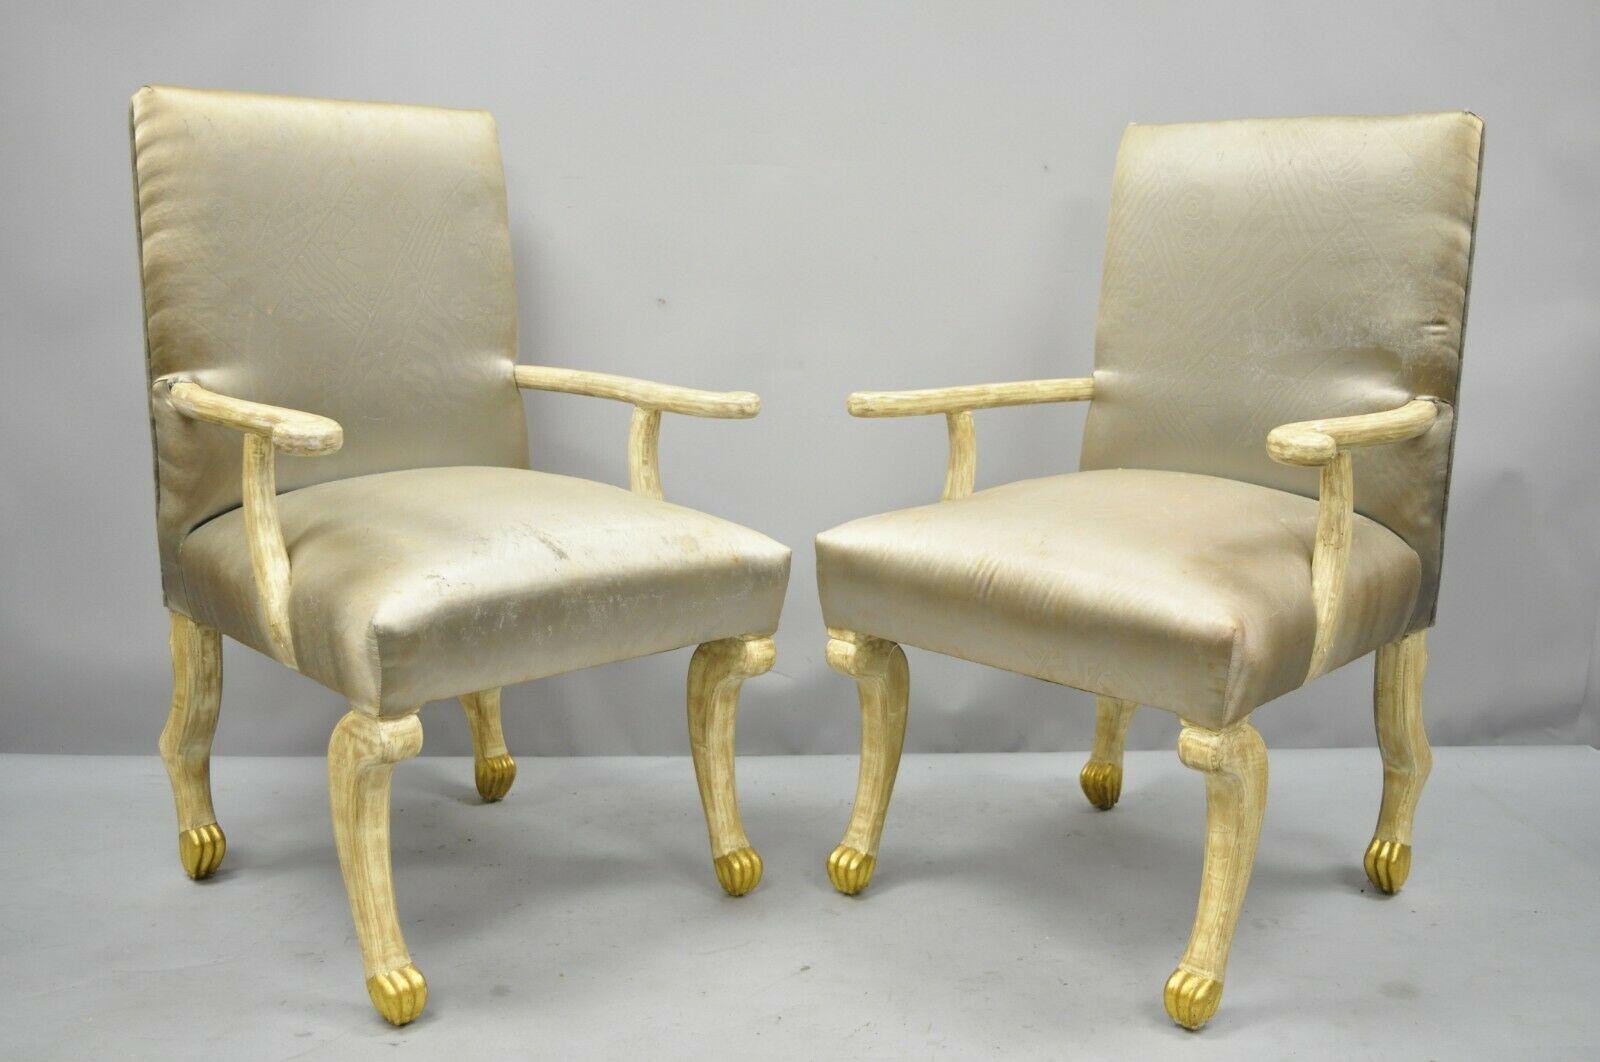 8 Hoof Paw Foot Regency Dining Chairs After the Etruscan Chair by John Dickinson 4